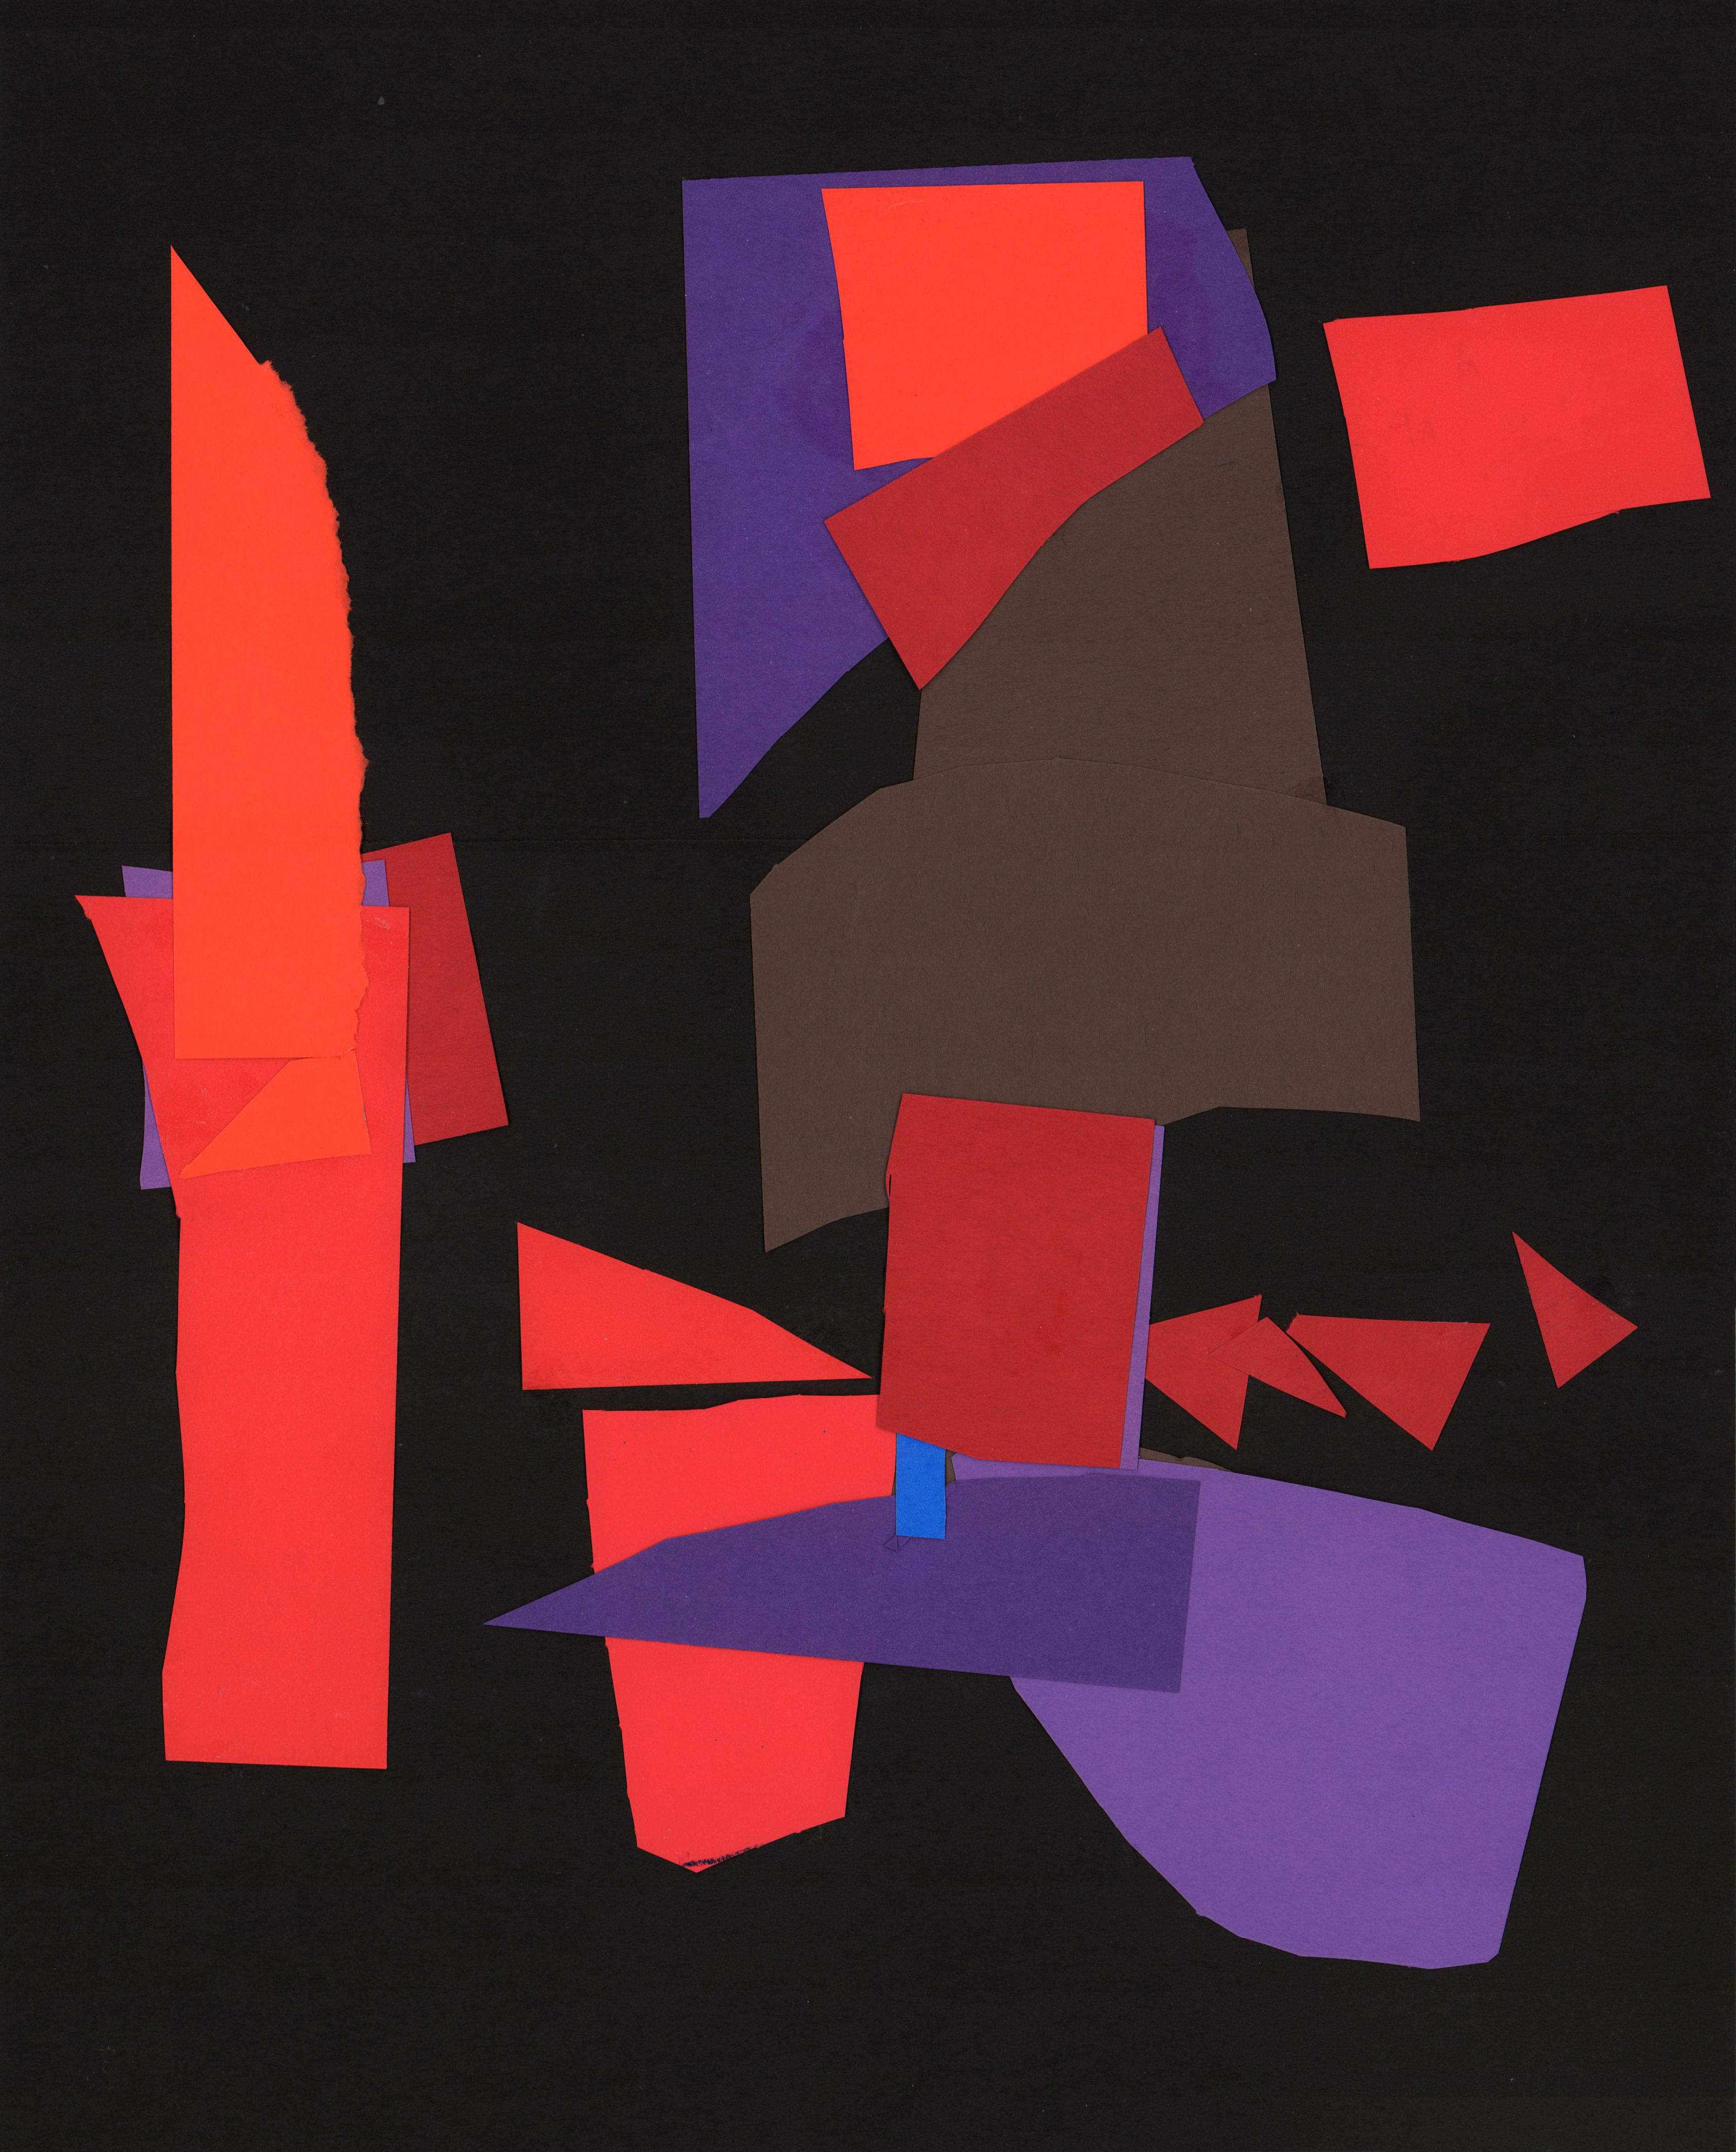 Abstract illustration made of construction paper depicting tall houses for dinosaurs, represented by tall and narrow orange, red, purple, and brown paper strips affixed to a black background.